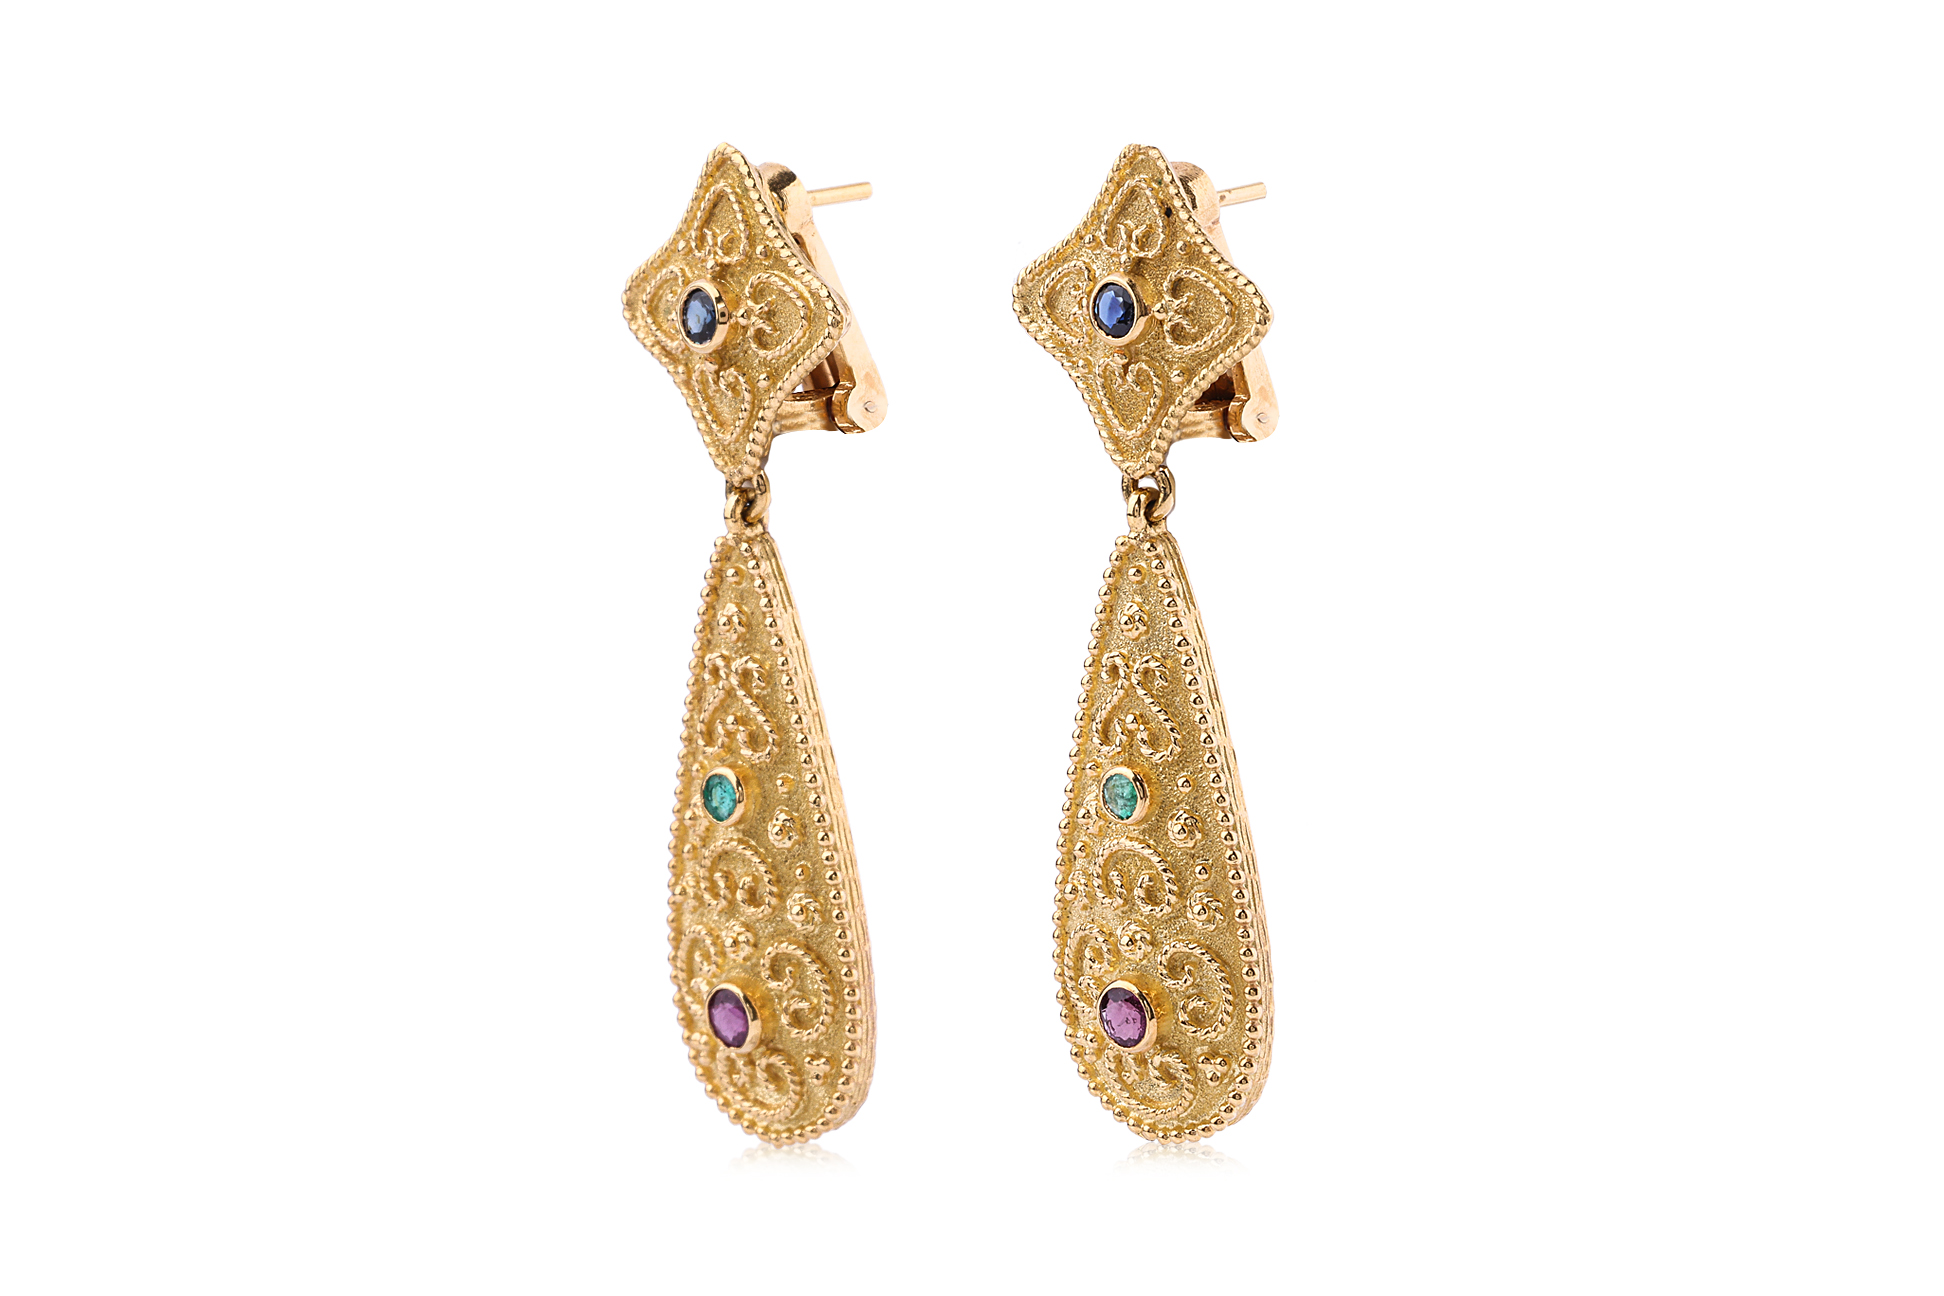 A PAIR OF REVIVAL STYLE MULTI GEM AND GOLD EARRINGS - Image 2 of 3